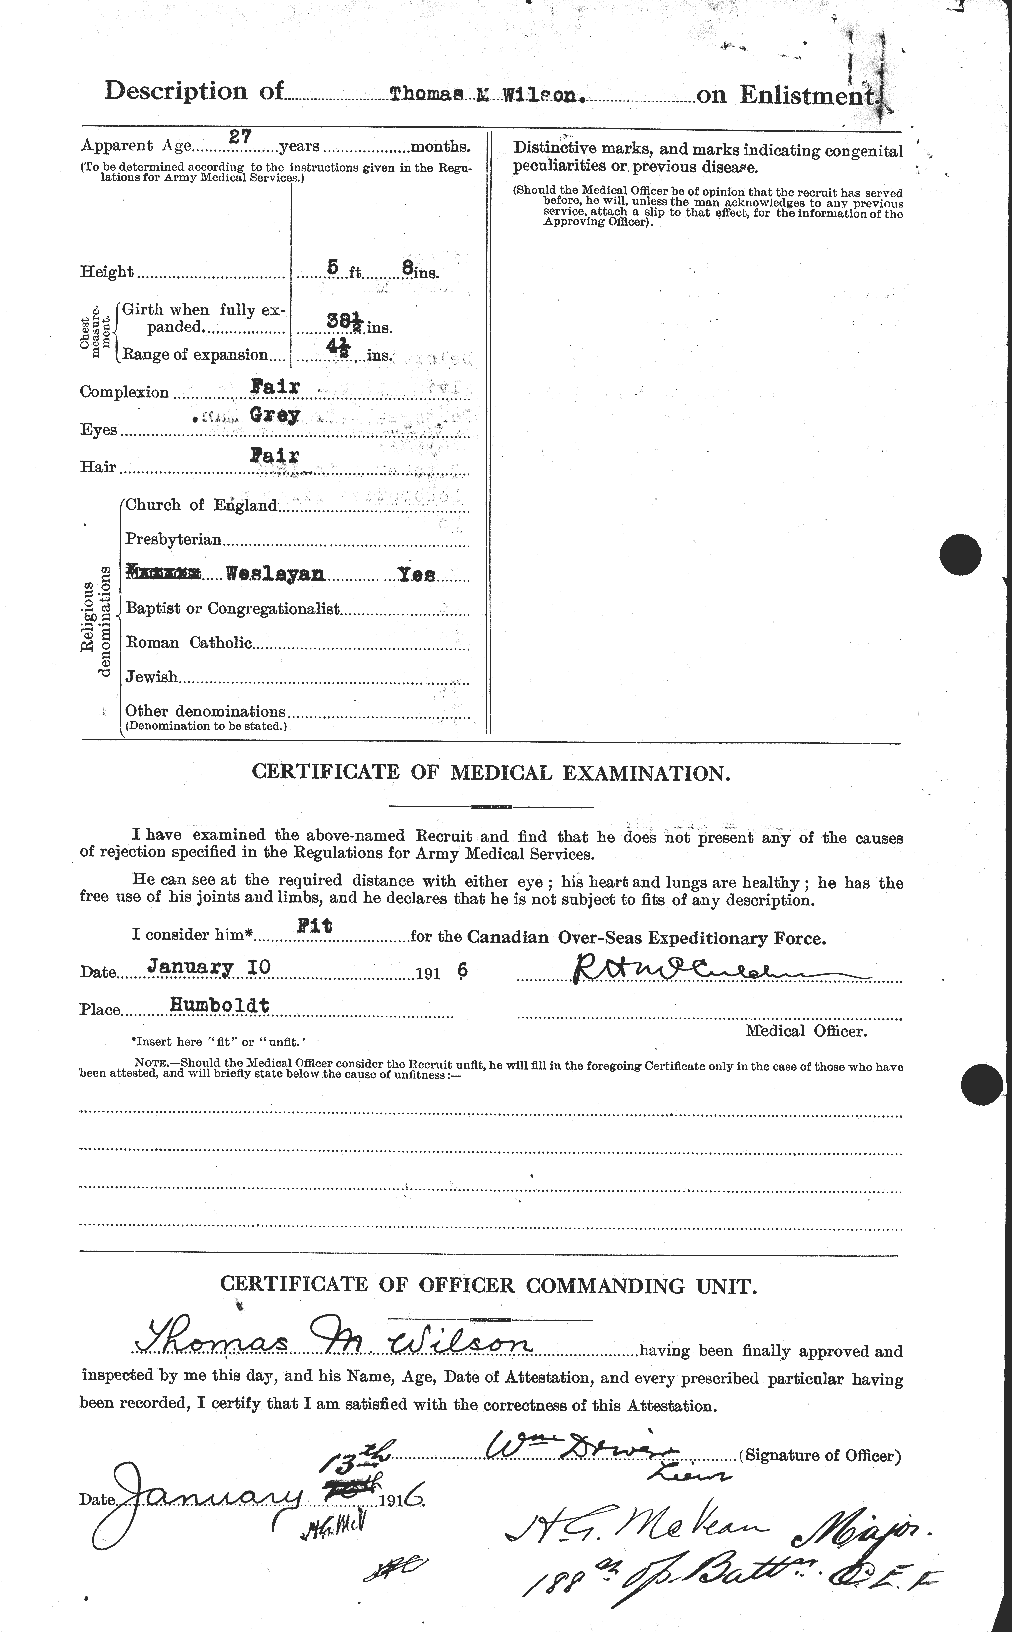 Personnel Records of the First World War - CEF 681286b